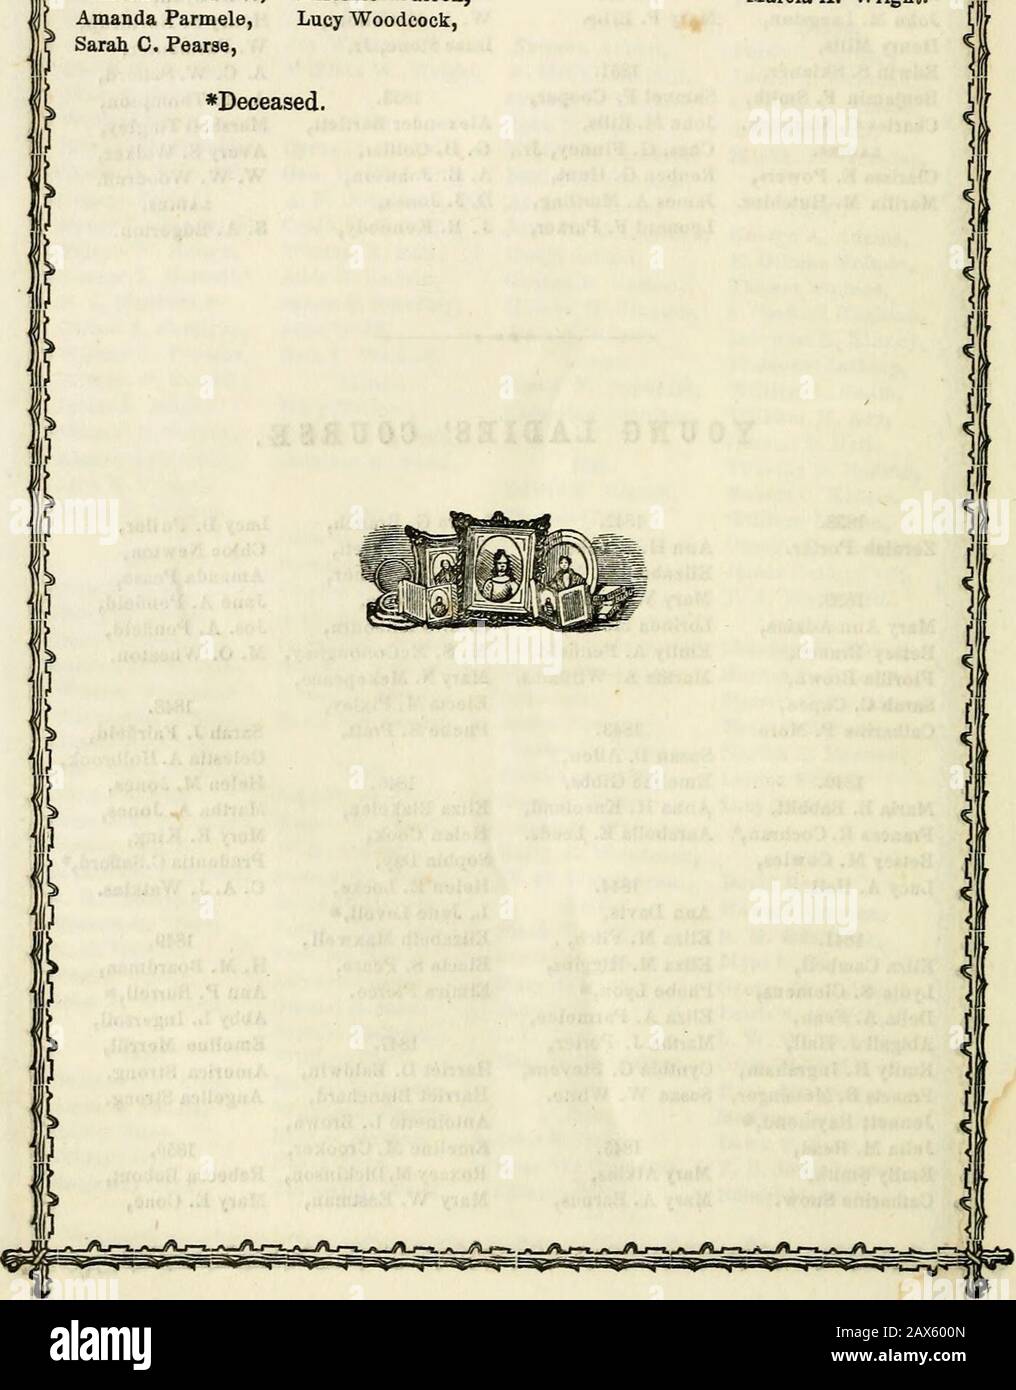 Annual catalogue of the officers and students of Oberlin College for the college year . Holbrook,Helen M. Jones,Martha A. Jones,Mary E. King,Prudentia C.Safibrd,iC. A. J. Watkins. 1849.H. M. Boardman,Ann P. Burrell,*Abby L. IngersoU,Emeline Merrill,America Strong,Angelica Strong. 1850.Rebecca Bebout,Mary E. Cone, Minerva P.Dayton,Ann Jane Gray,Harriet A. Green,Clarinda Paimele,Lacy A. Stanton,Eunice Thompson. Julia A. BueU,Eunice W. Dyer,Amanda Gardner,Sally Holley,Almeda E. Latimer,Amanda Parmele,Sarah C. Pearse, Abby R. Skinner,Sarah G. Turner,Mary C. Waterbury. 1852.Abby Barber,Emeline L. B Stock Photo